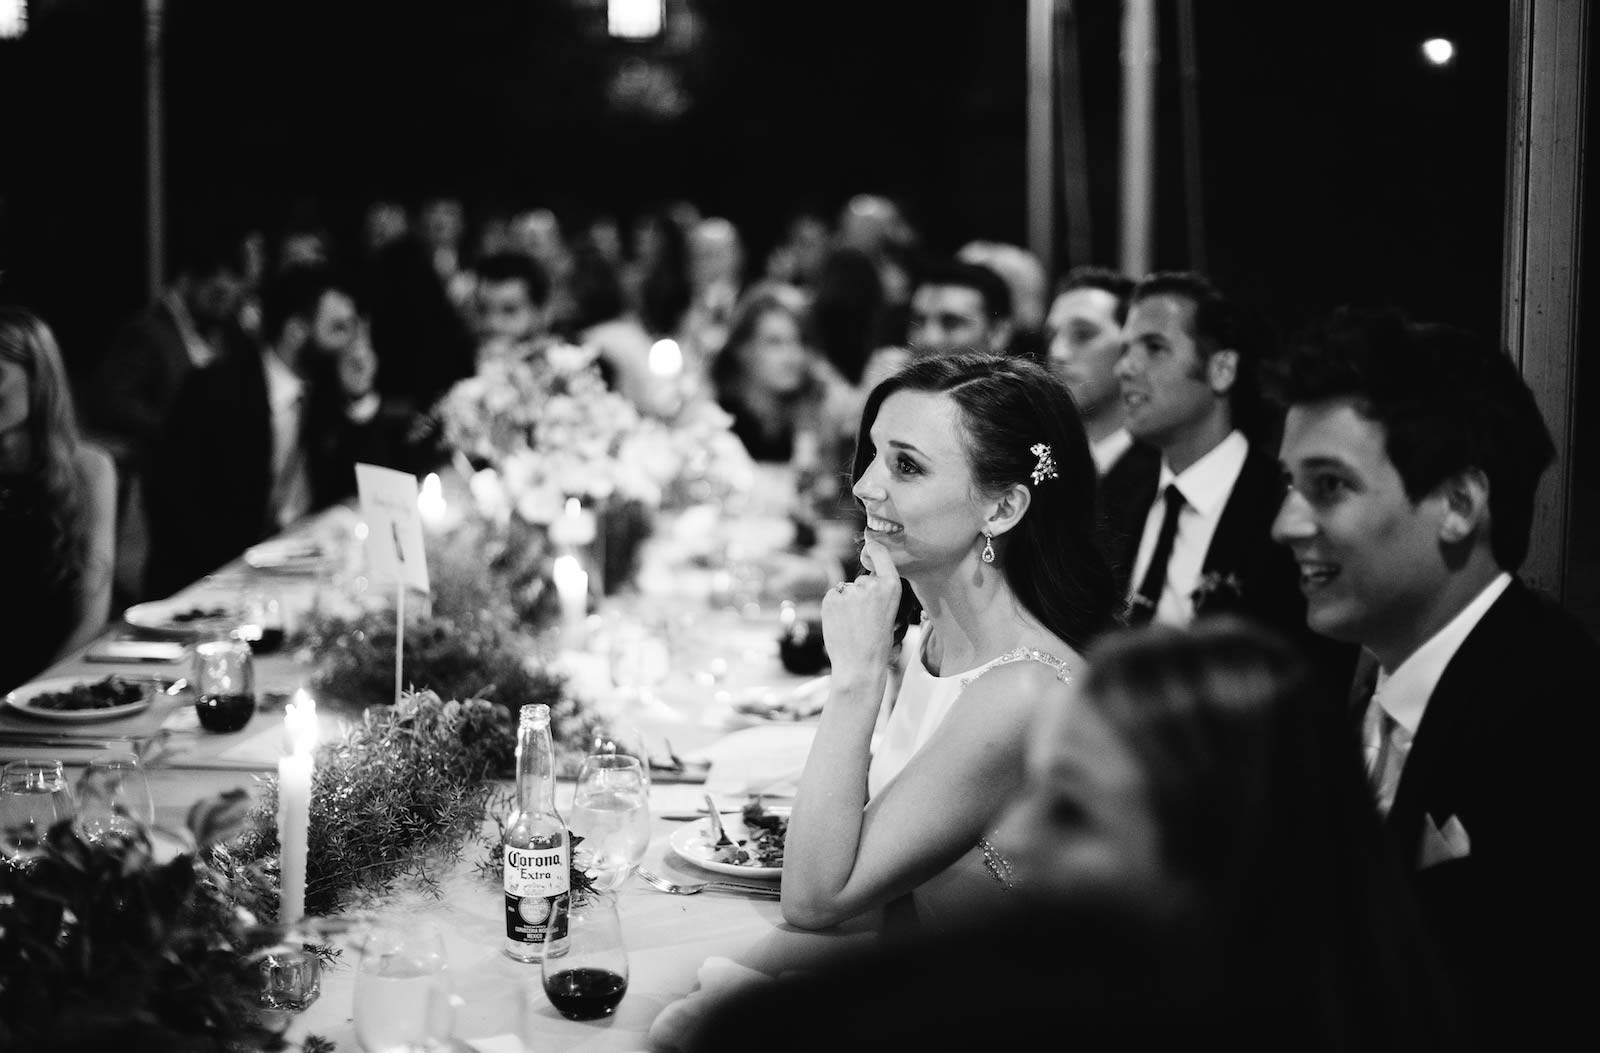 Wedding reception speeches to the bride and groom during dinner